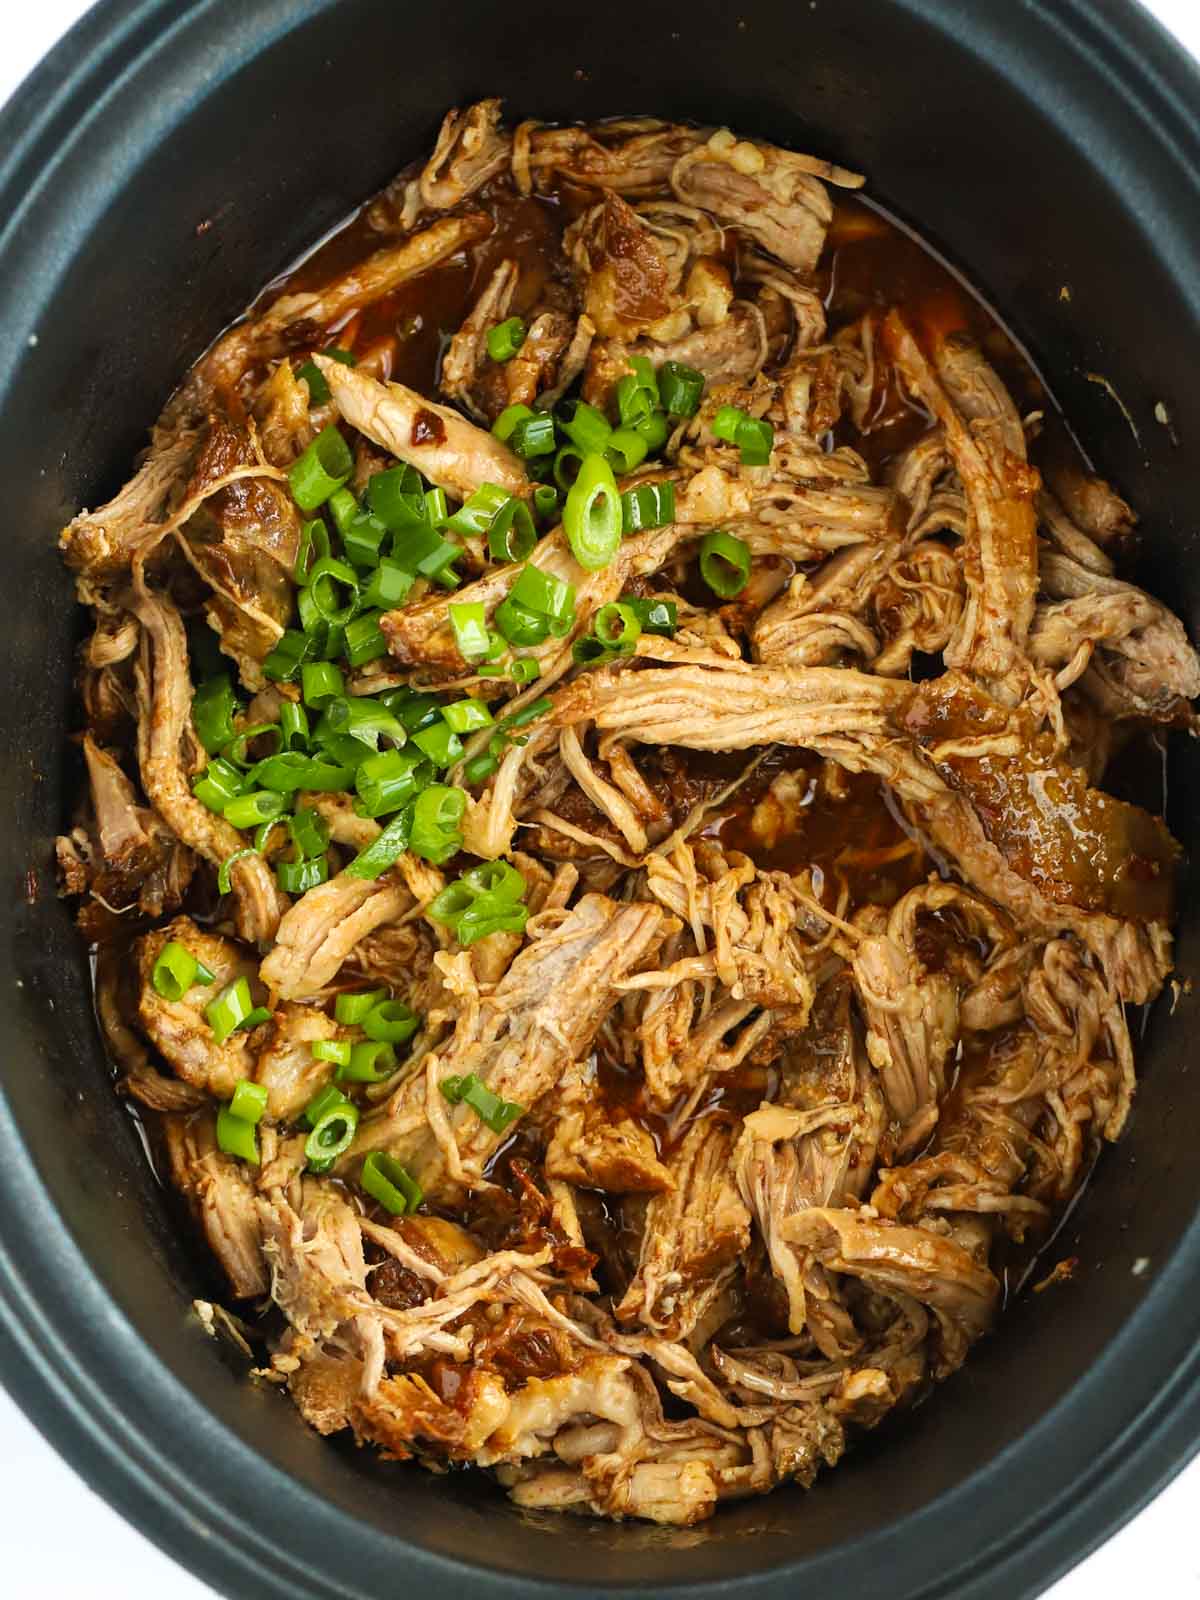 Slow cooker (crockpot) pulled pork recipe with honey and chipotle